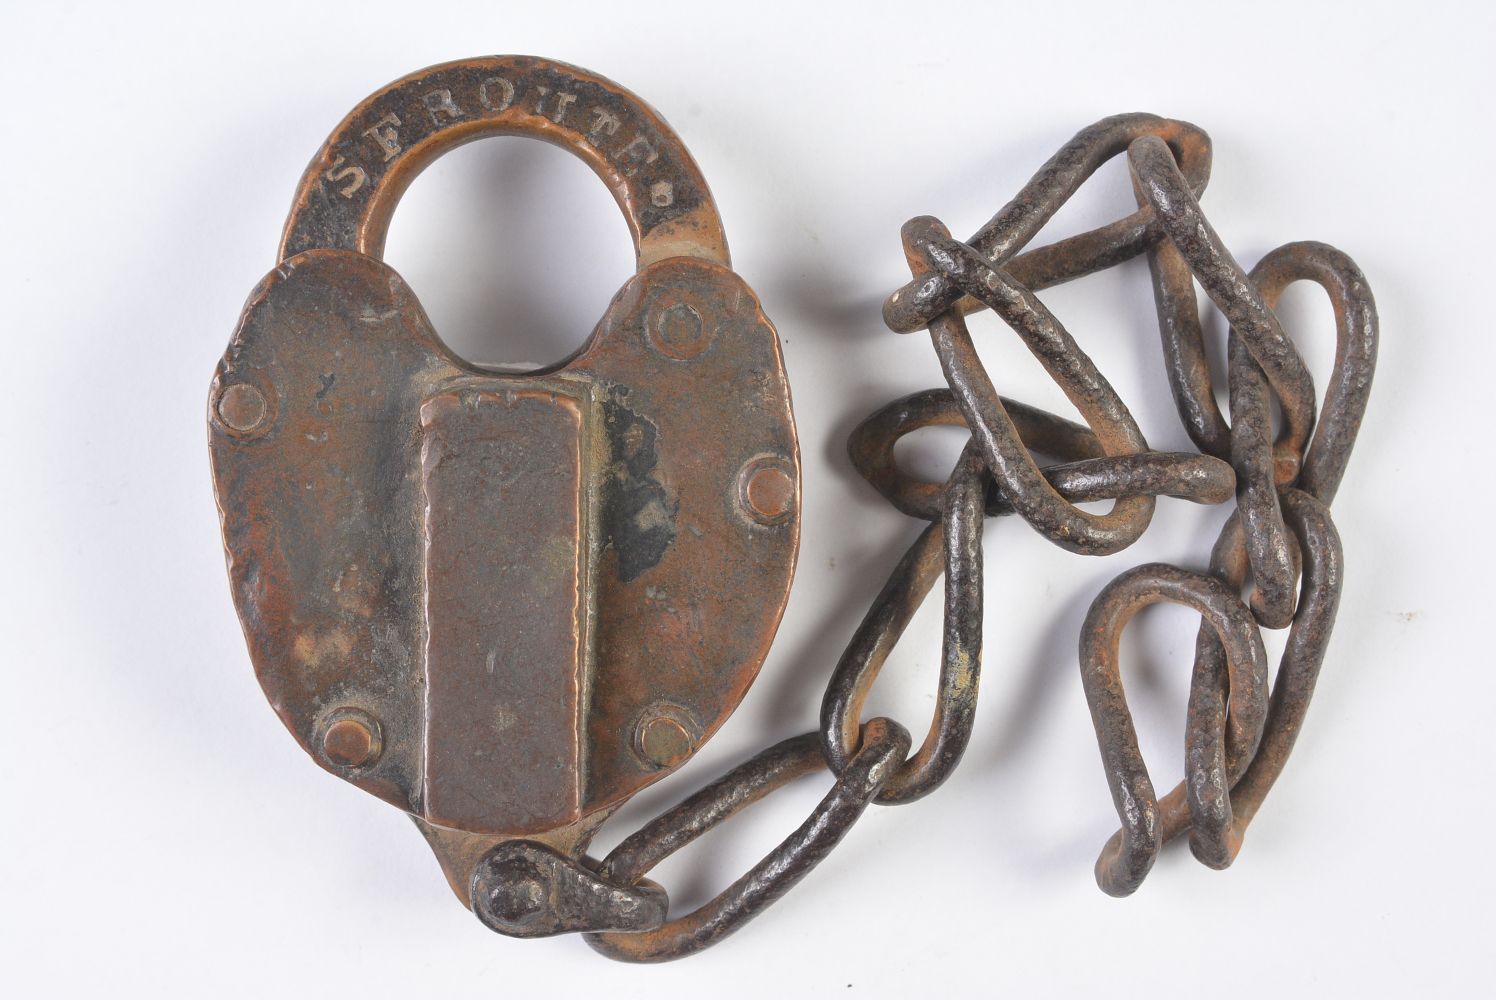 AN A.T.&S.F. RAILROAD PADLOCK MARKED 'SF ROUTE 5'